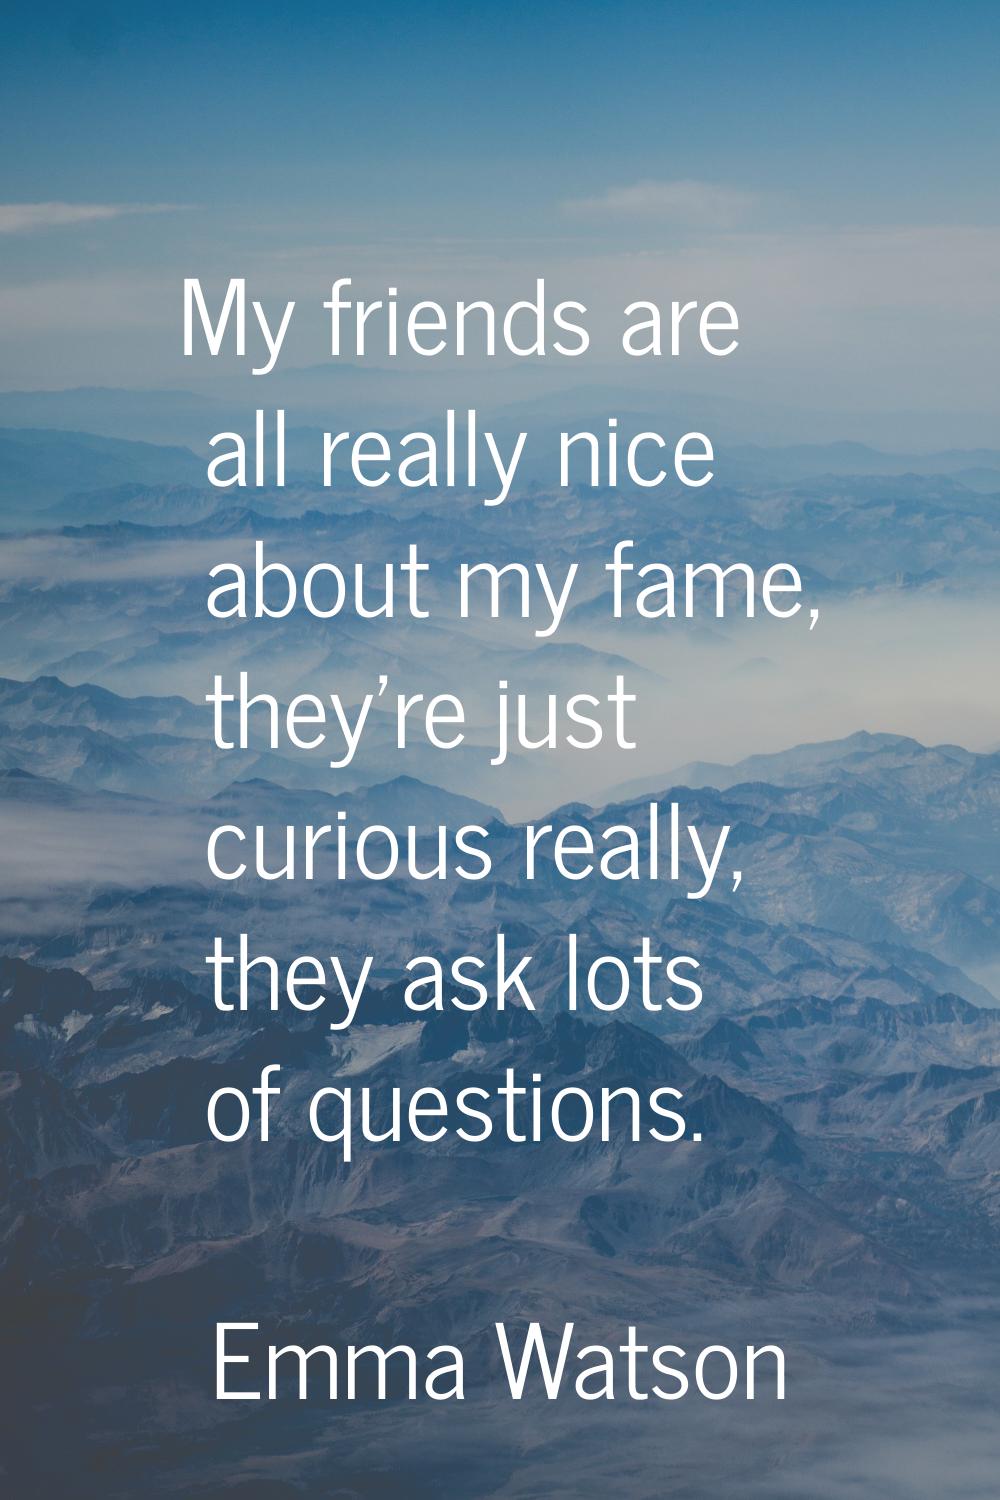 My friends are all really nice about my fame, they're just curious really, they ask lots of questio